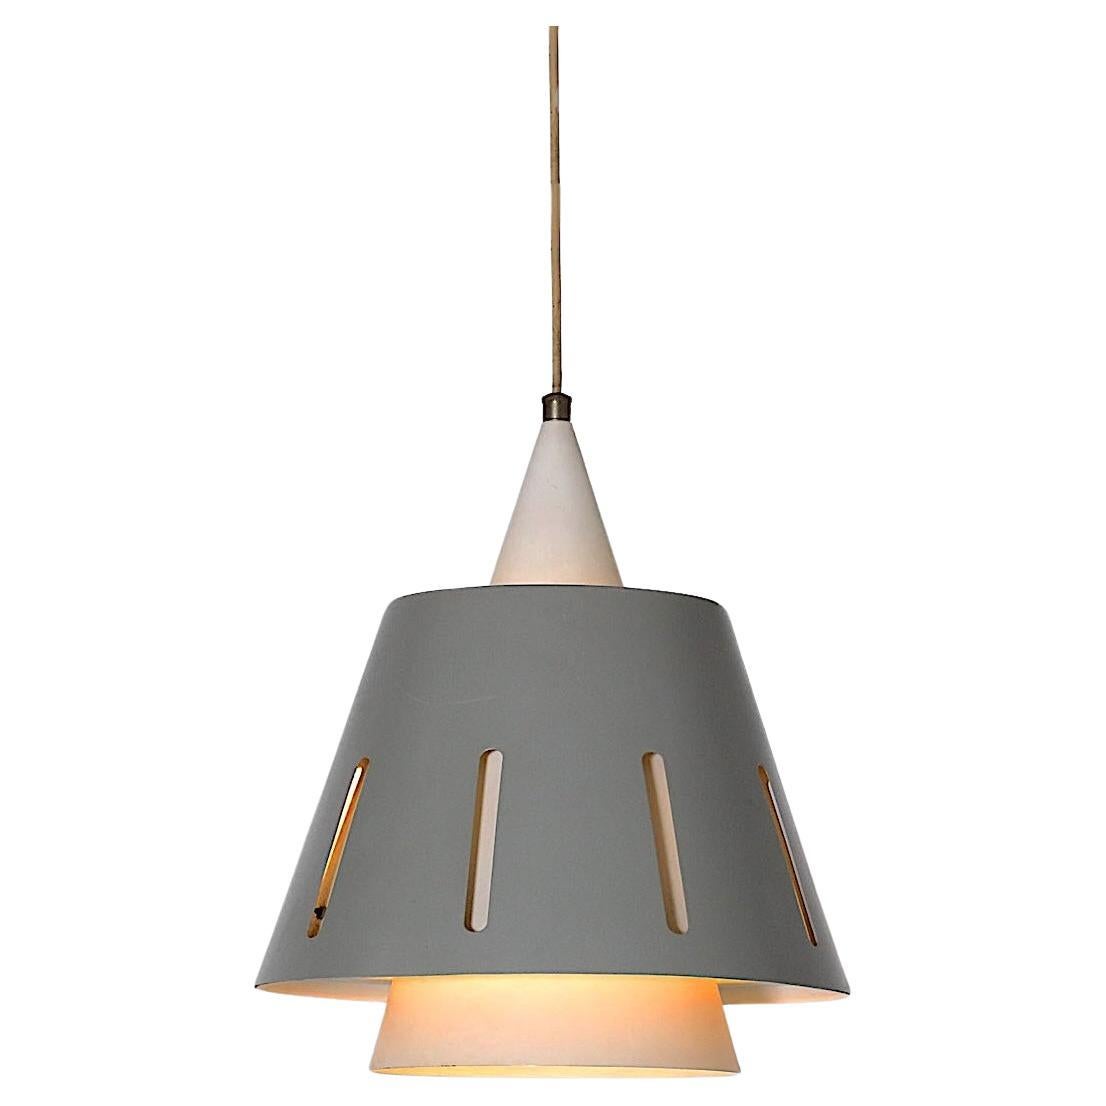 Rare Hala Zeist 'Sun Series' Gray Ceiling Lamp by H. Busquet - 1950s For Sale